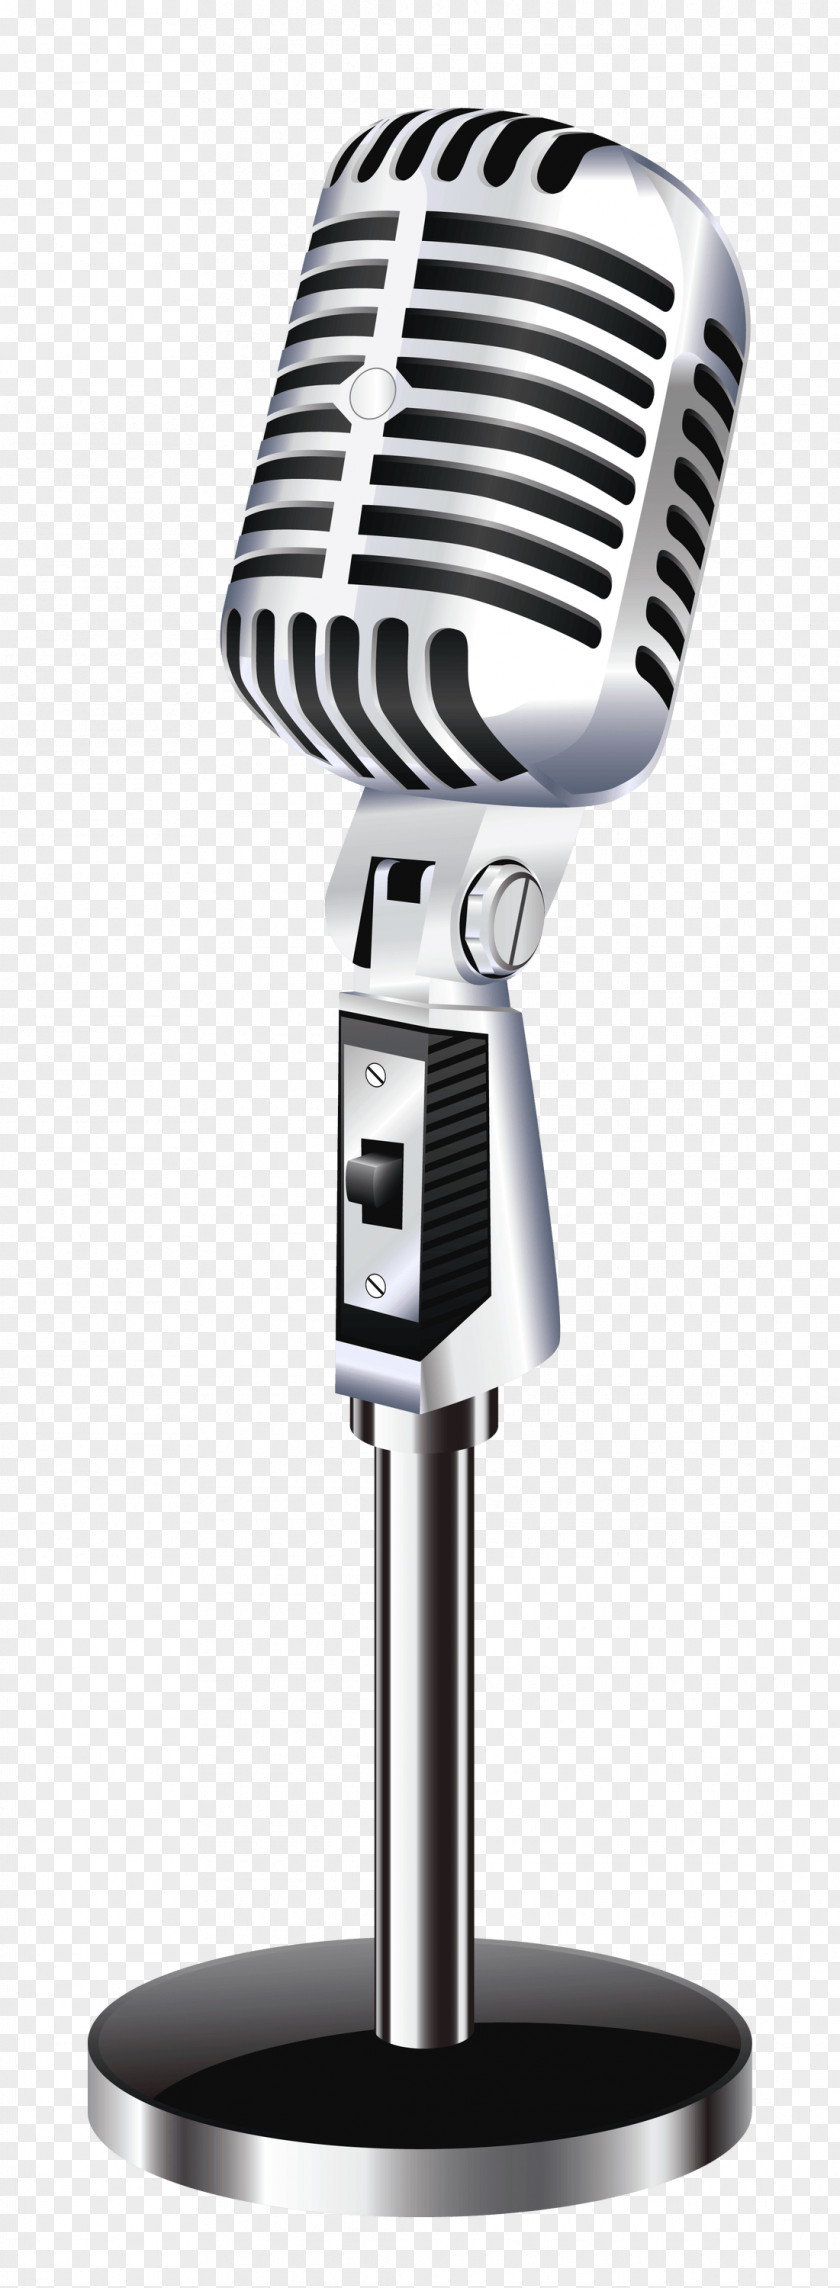 Vintage Table Microphone PNG Microphone, gray and black microphone illustration clipart PNG